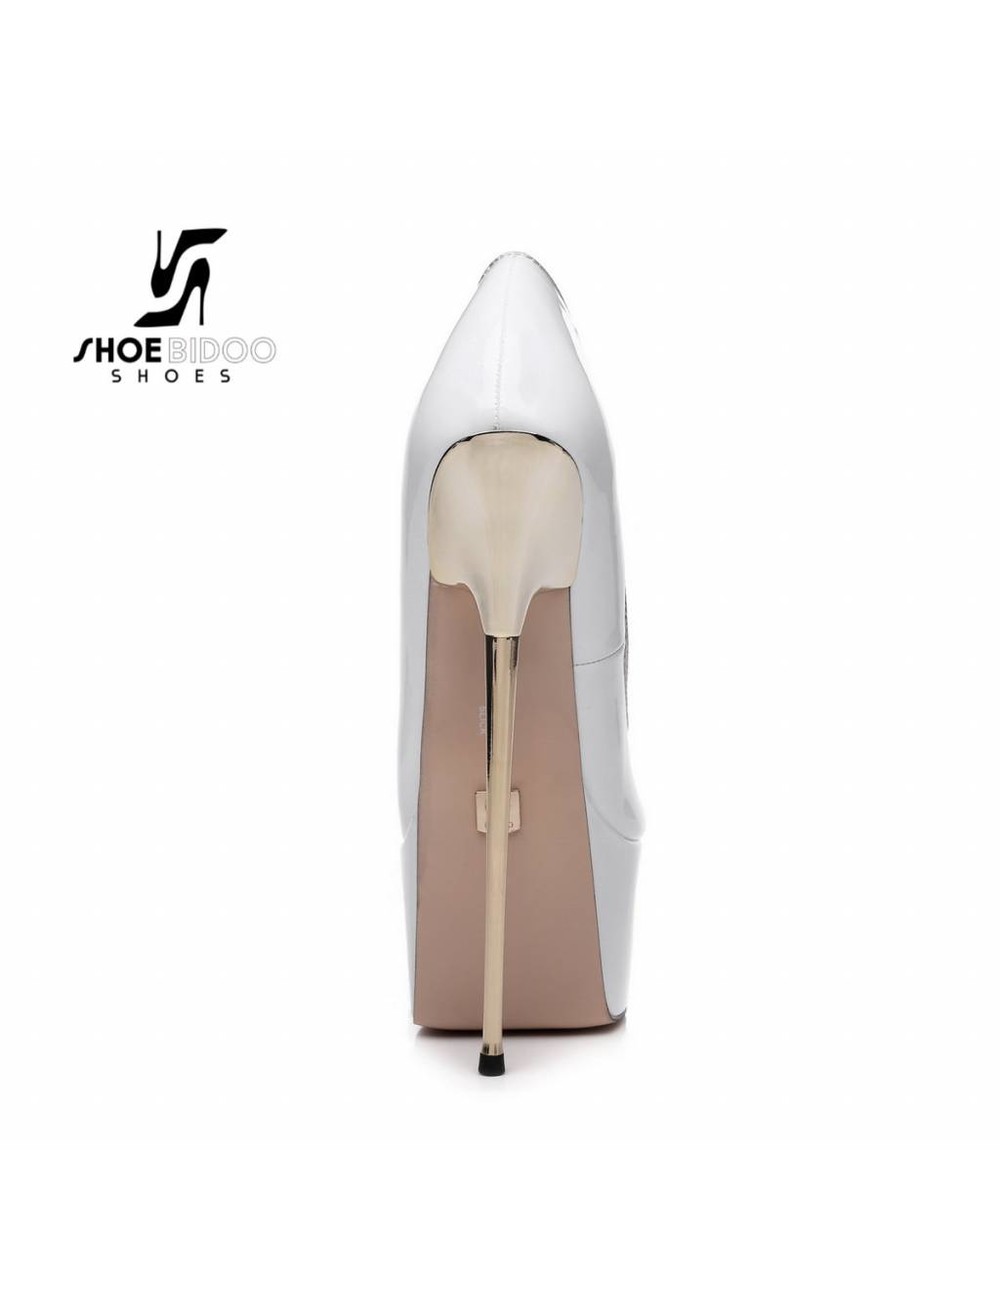 SLICK White lacquer platform pumps with ultra high gold metal heels